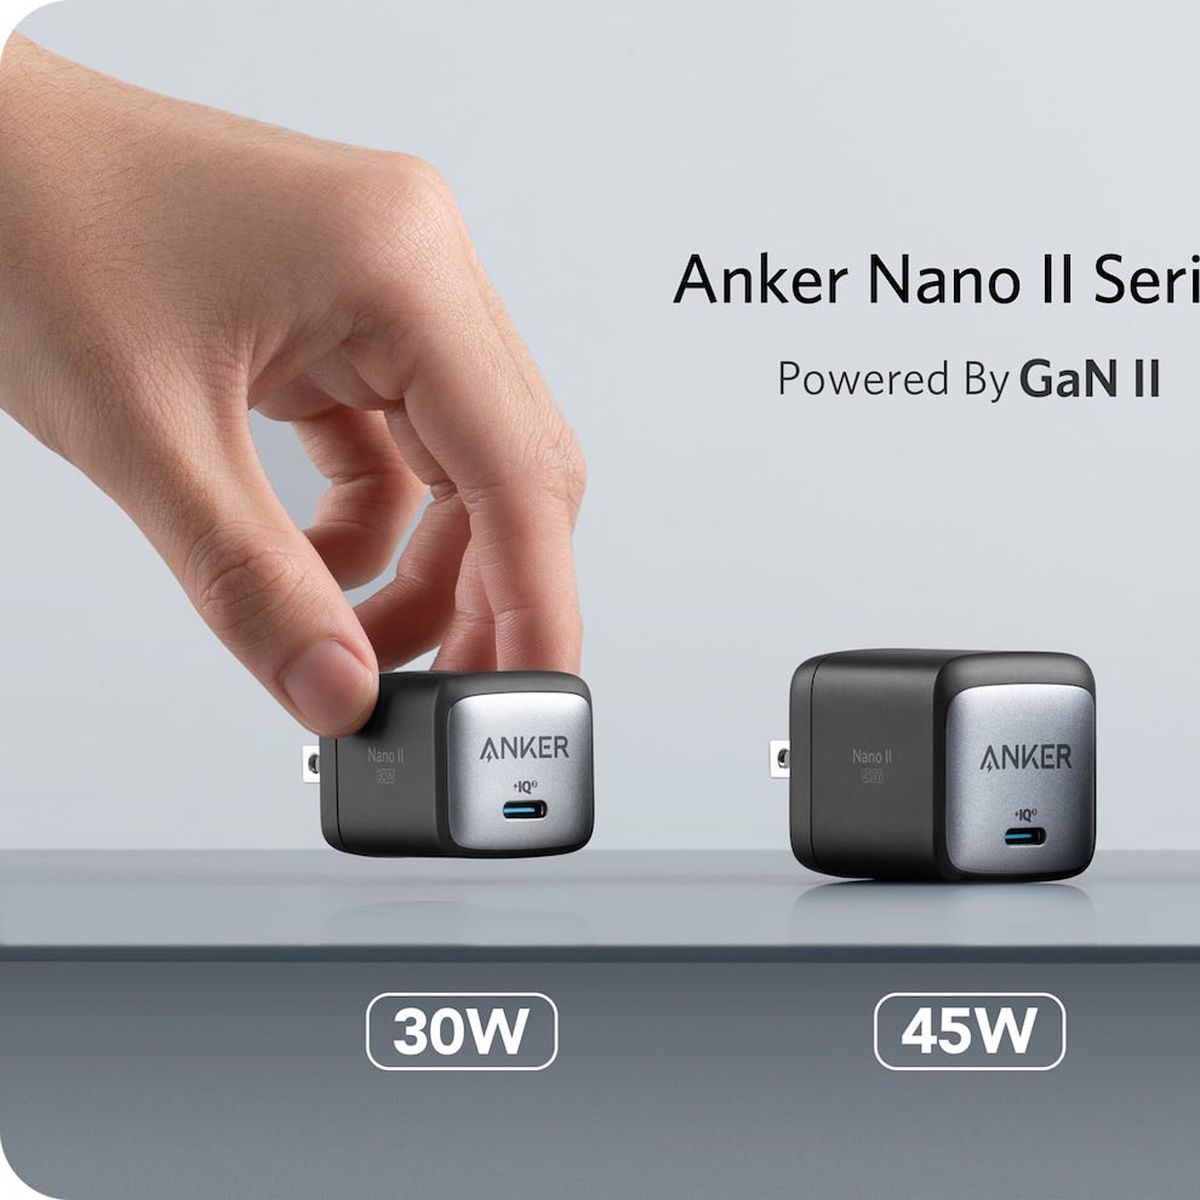 Anker's Nano II USB-C Chargers Pack Up to 65W of Power in a Smaller Design  - MacRumors